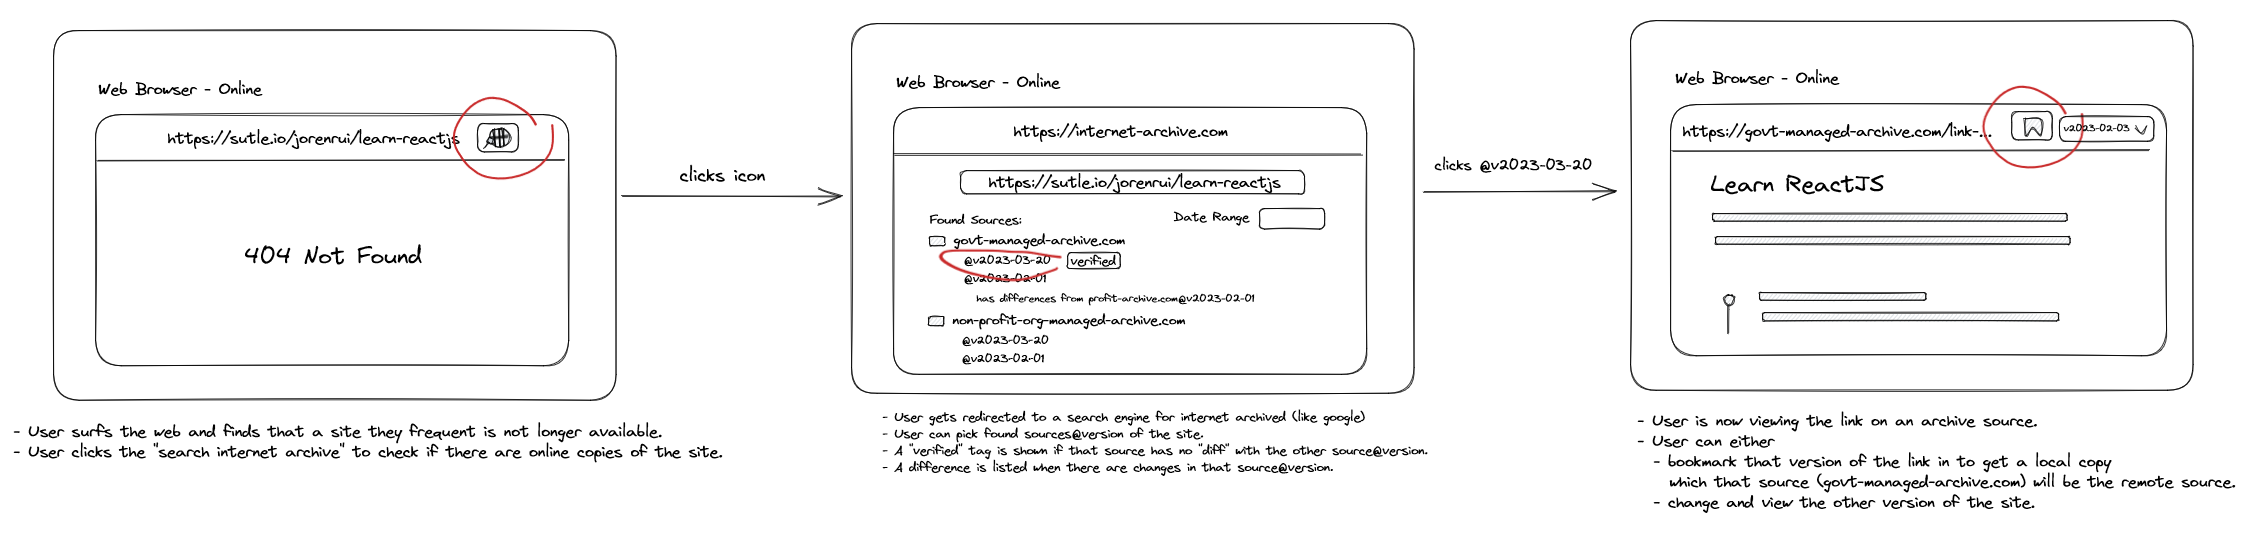 a diagram showing how a user bookmarks a site that is unavailable. The user clicks an icon in which redirects them to a search engine for web archives. The user can now view the link on multiple sources with different versions of the site.